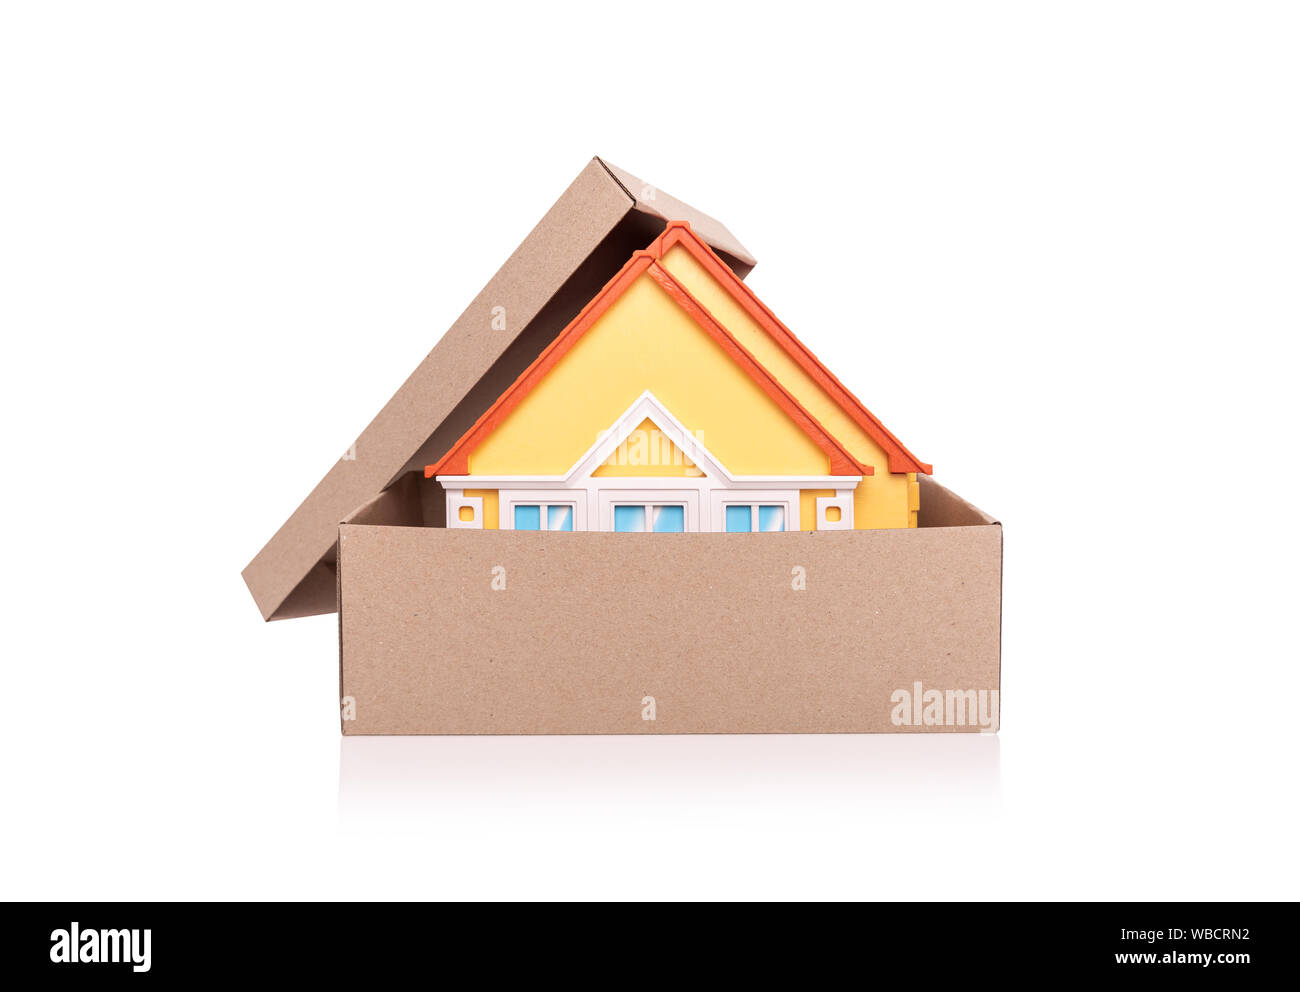 Toy model of a house in a cardboard box on white background. Stock Photo